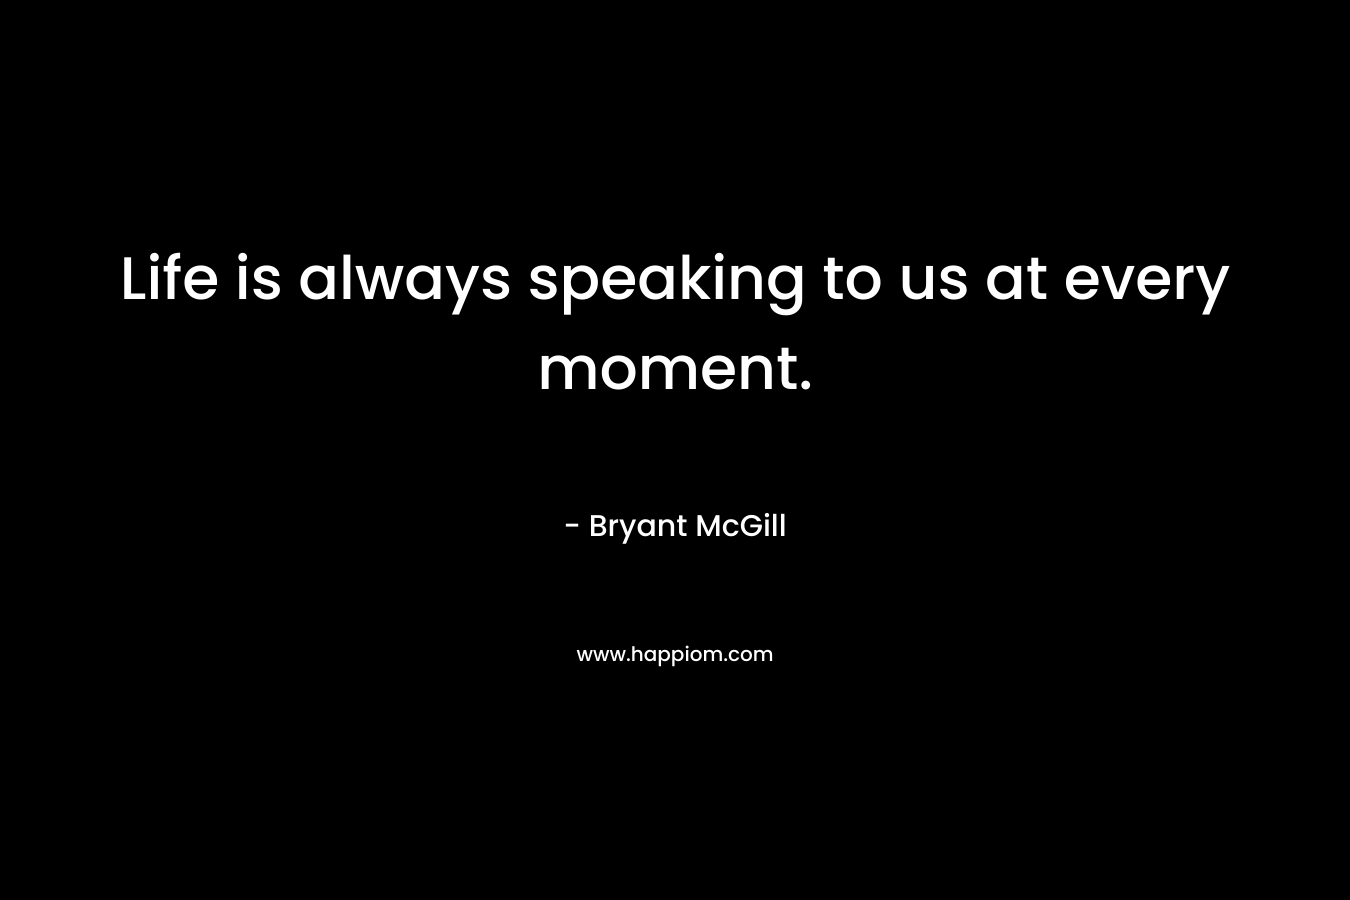 Life is always speaking to us at every moment.